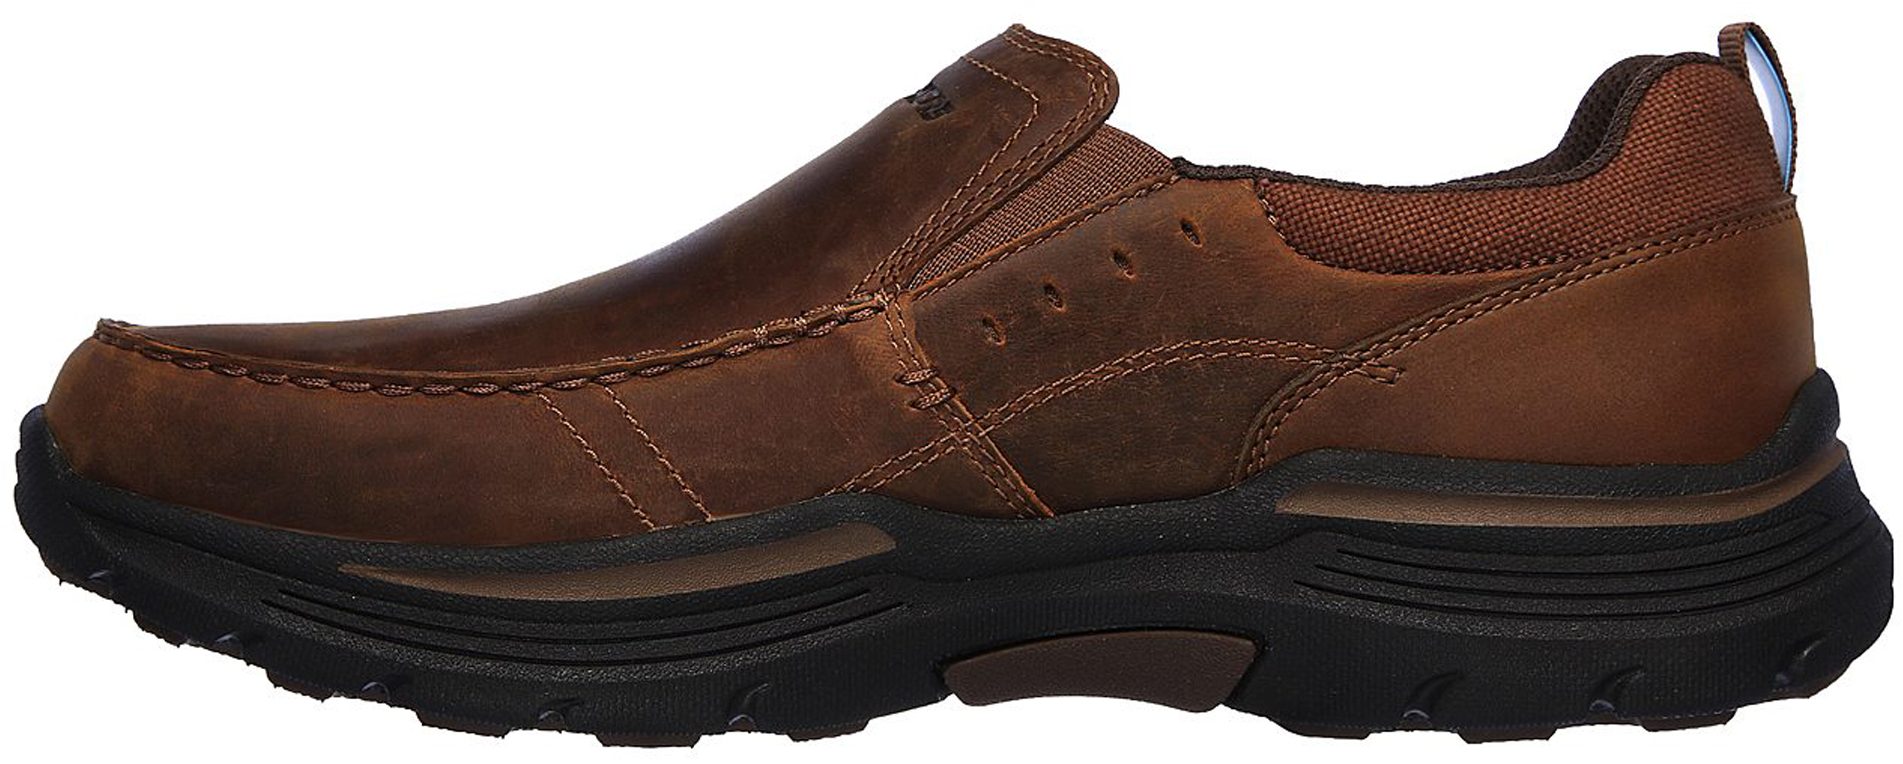 Skechers Relaxed Fit: Expended - Seveno Brown 66146 CDB - Casual Shoes ...